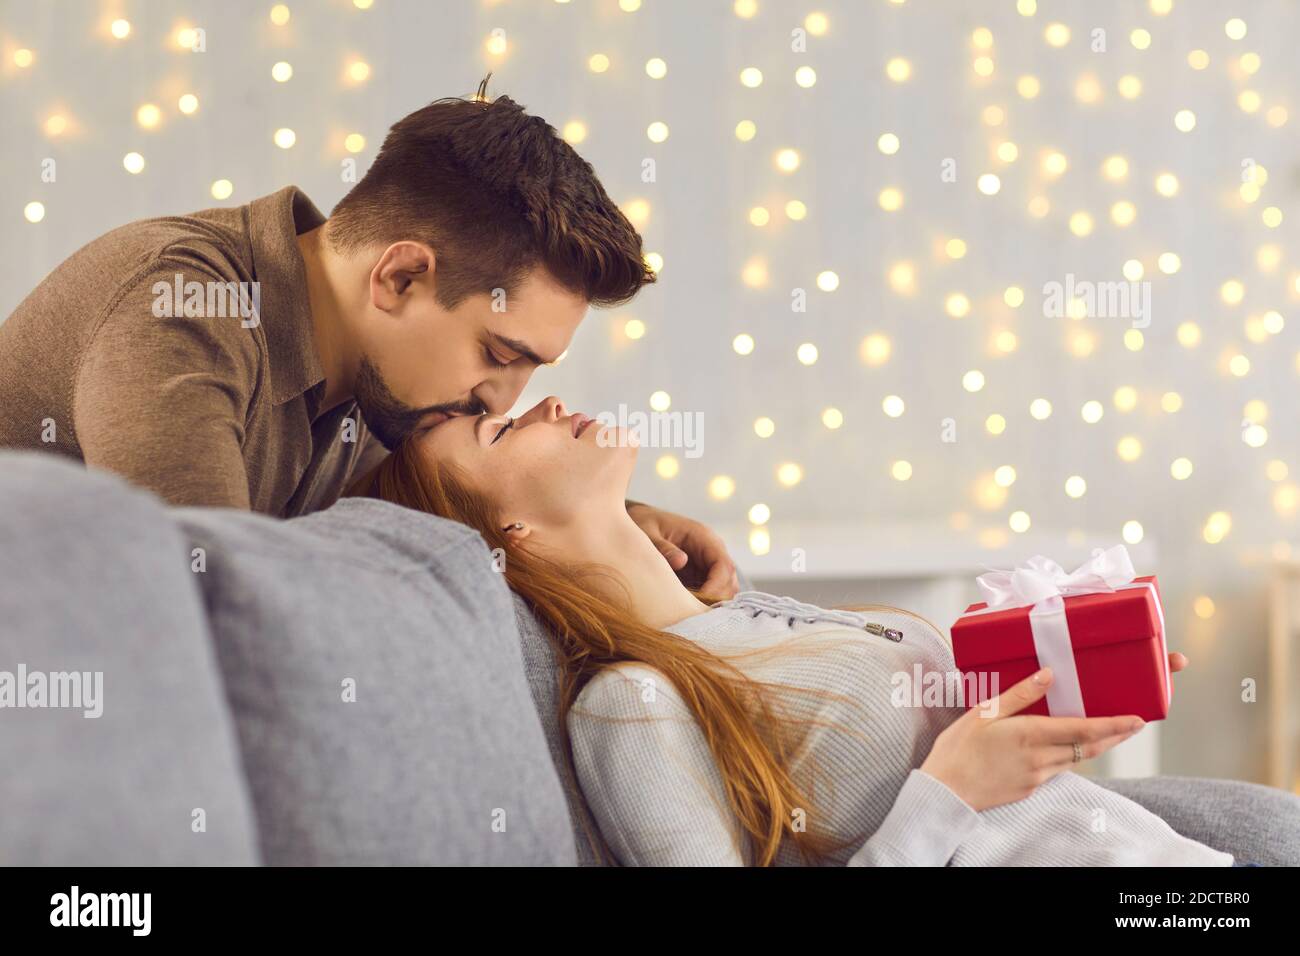 Side view of a loving husband kissing his young wife on the forehead after giving her a gift. Stock Photo